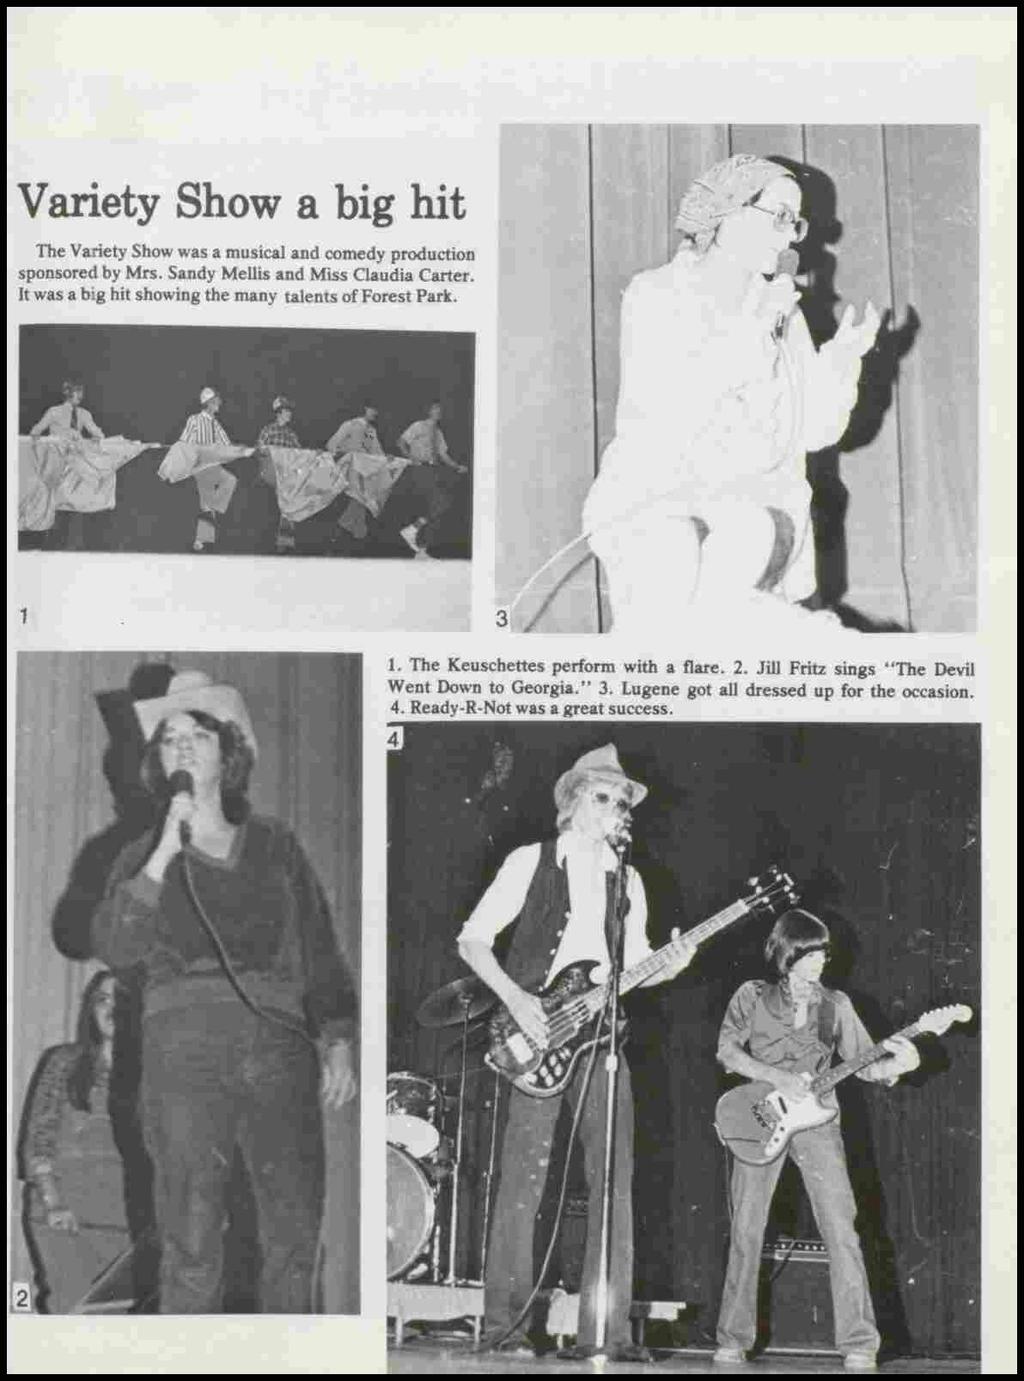 Variety Show a big hit The Variety Show was a musical and comedy production sponsored by Mrs. Sandy Mellis and Miss Claudia Carter.